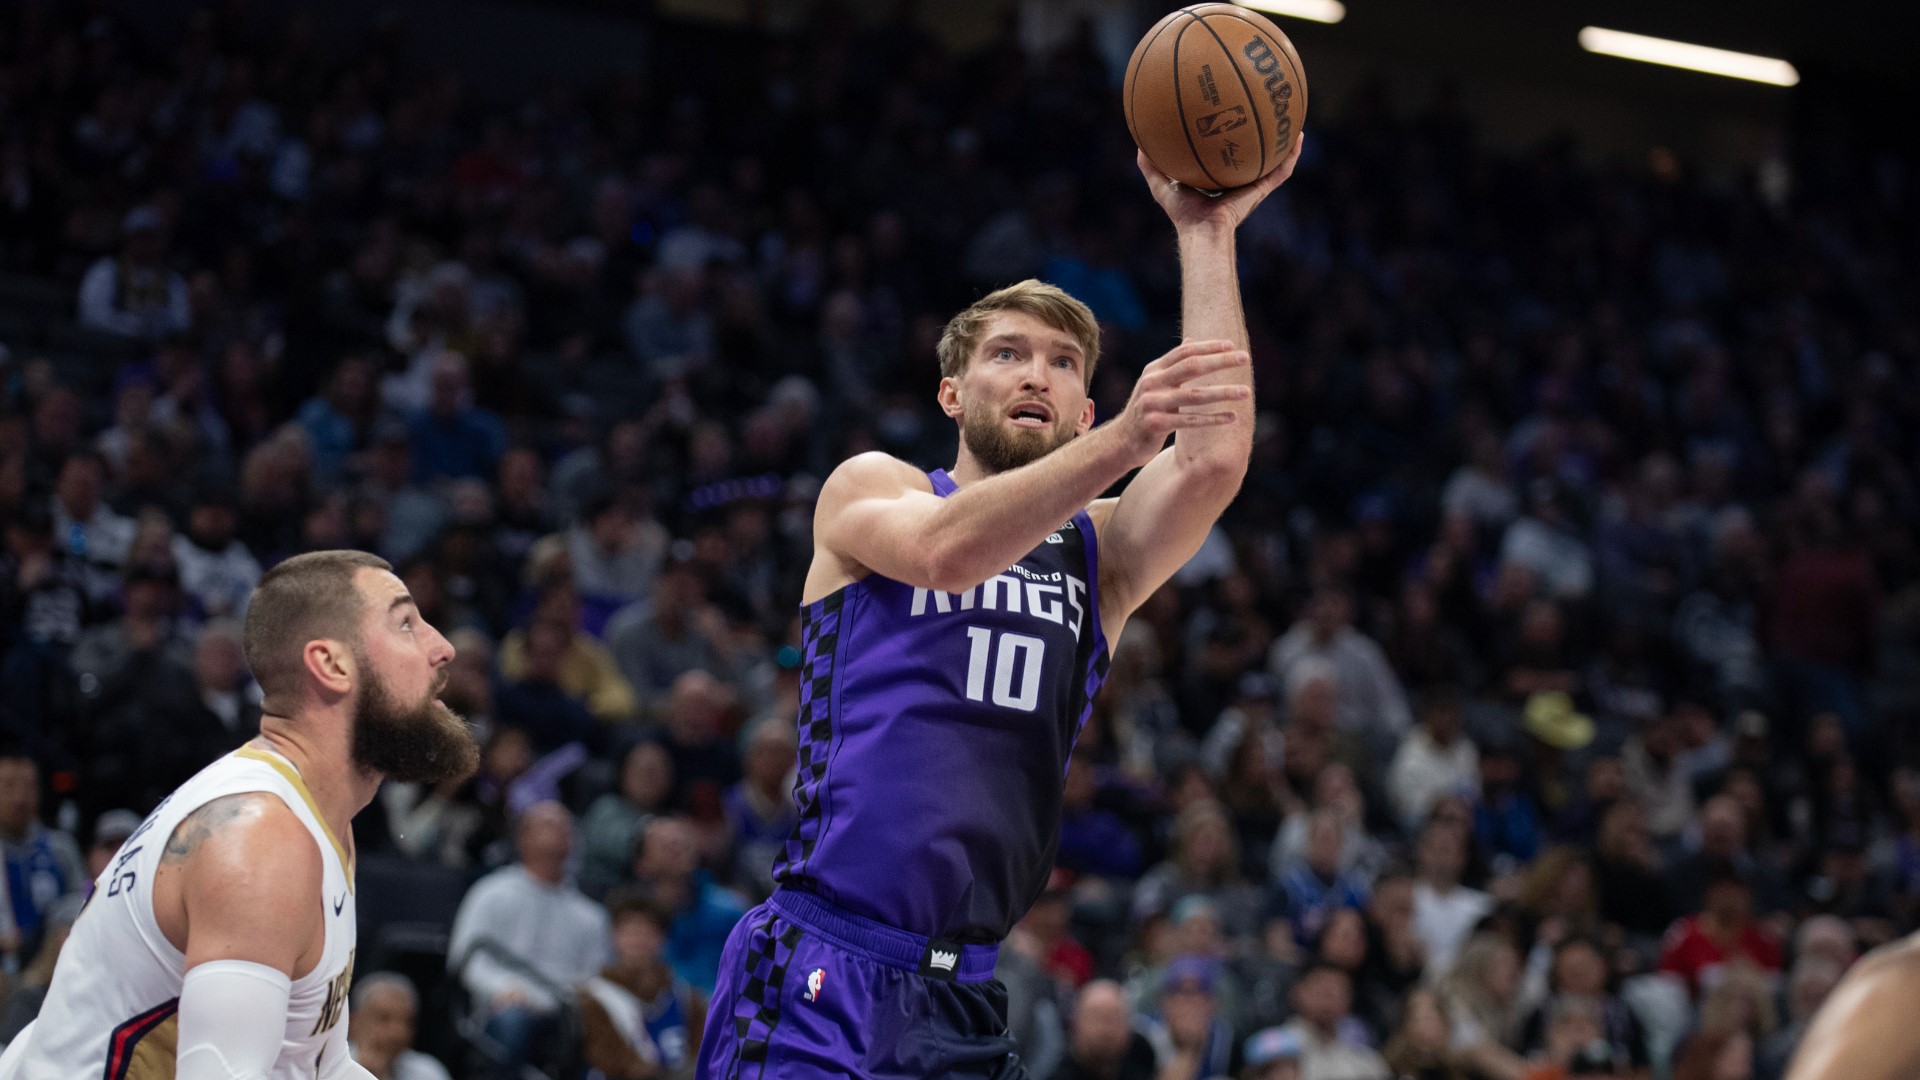 The Sacramento Kings have failed to beat the New Orleans Pelicans all season, and that did not change Sunday after a blowout loss.